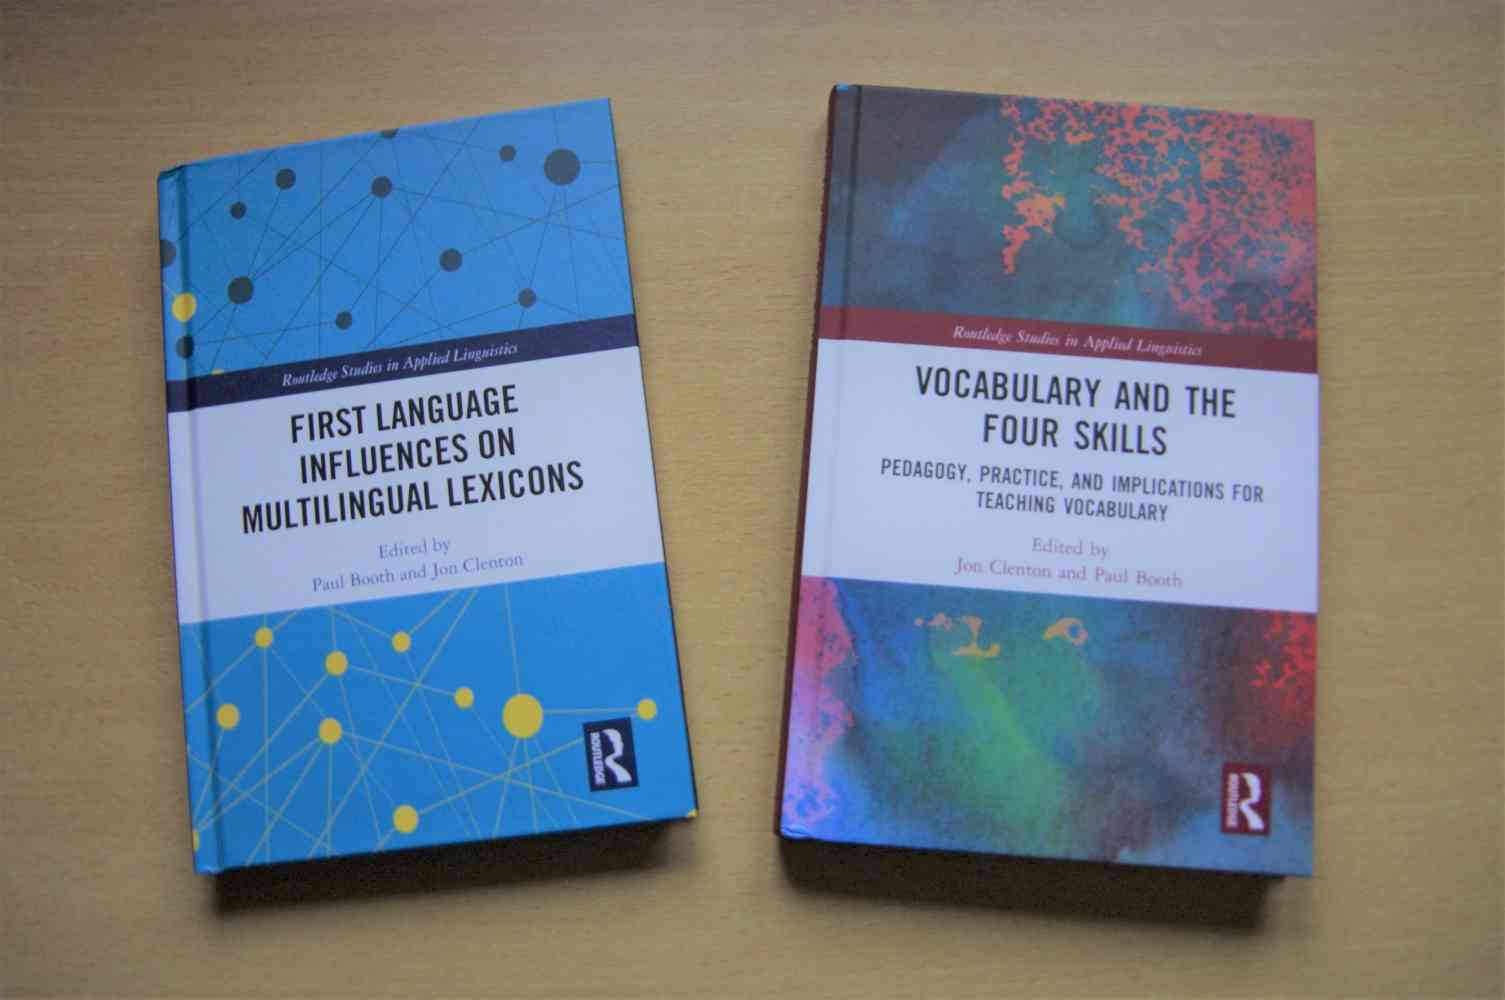 I was First Editor for a book on 'First Language Backgrounds and Multilingual Lexicons' (Routledge 2020). The book brings together respected authors from around the world to contribute chapters from a variety of different language backgrounds including European languages, Arabic, and Japanese.  As an example of how the vocabulary research has informed postgraduate teaching worldwide, I was co-editor for a 2020 book on 'Vocabulary and the four skills: Pedagogy, practice, and implications for teaching vocabulary' (Routledge 2020) and wrote two chapters. Each lead author contributor is an internationally recognised vocabulary expert in their respective field.